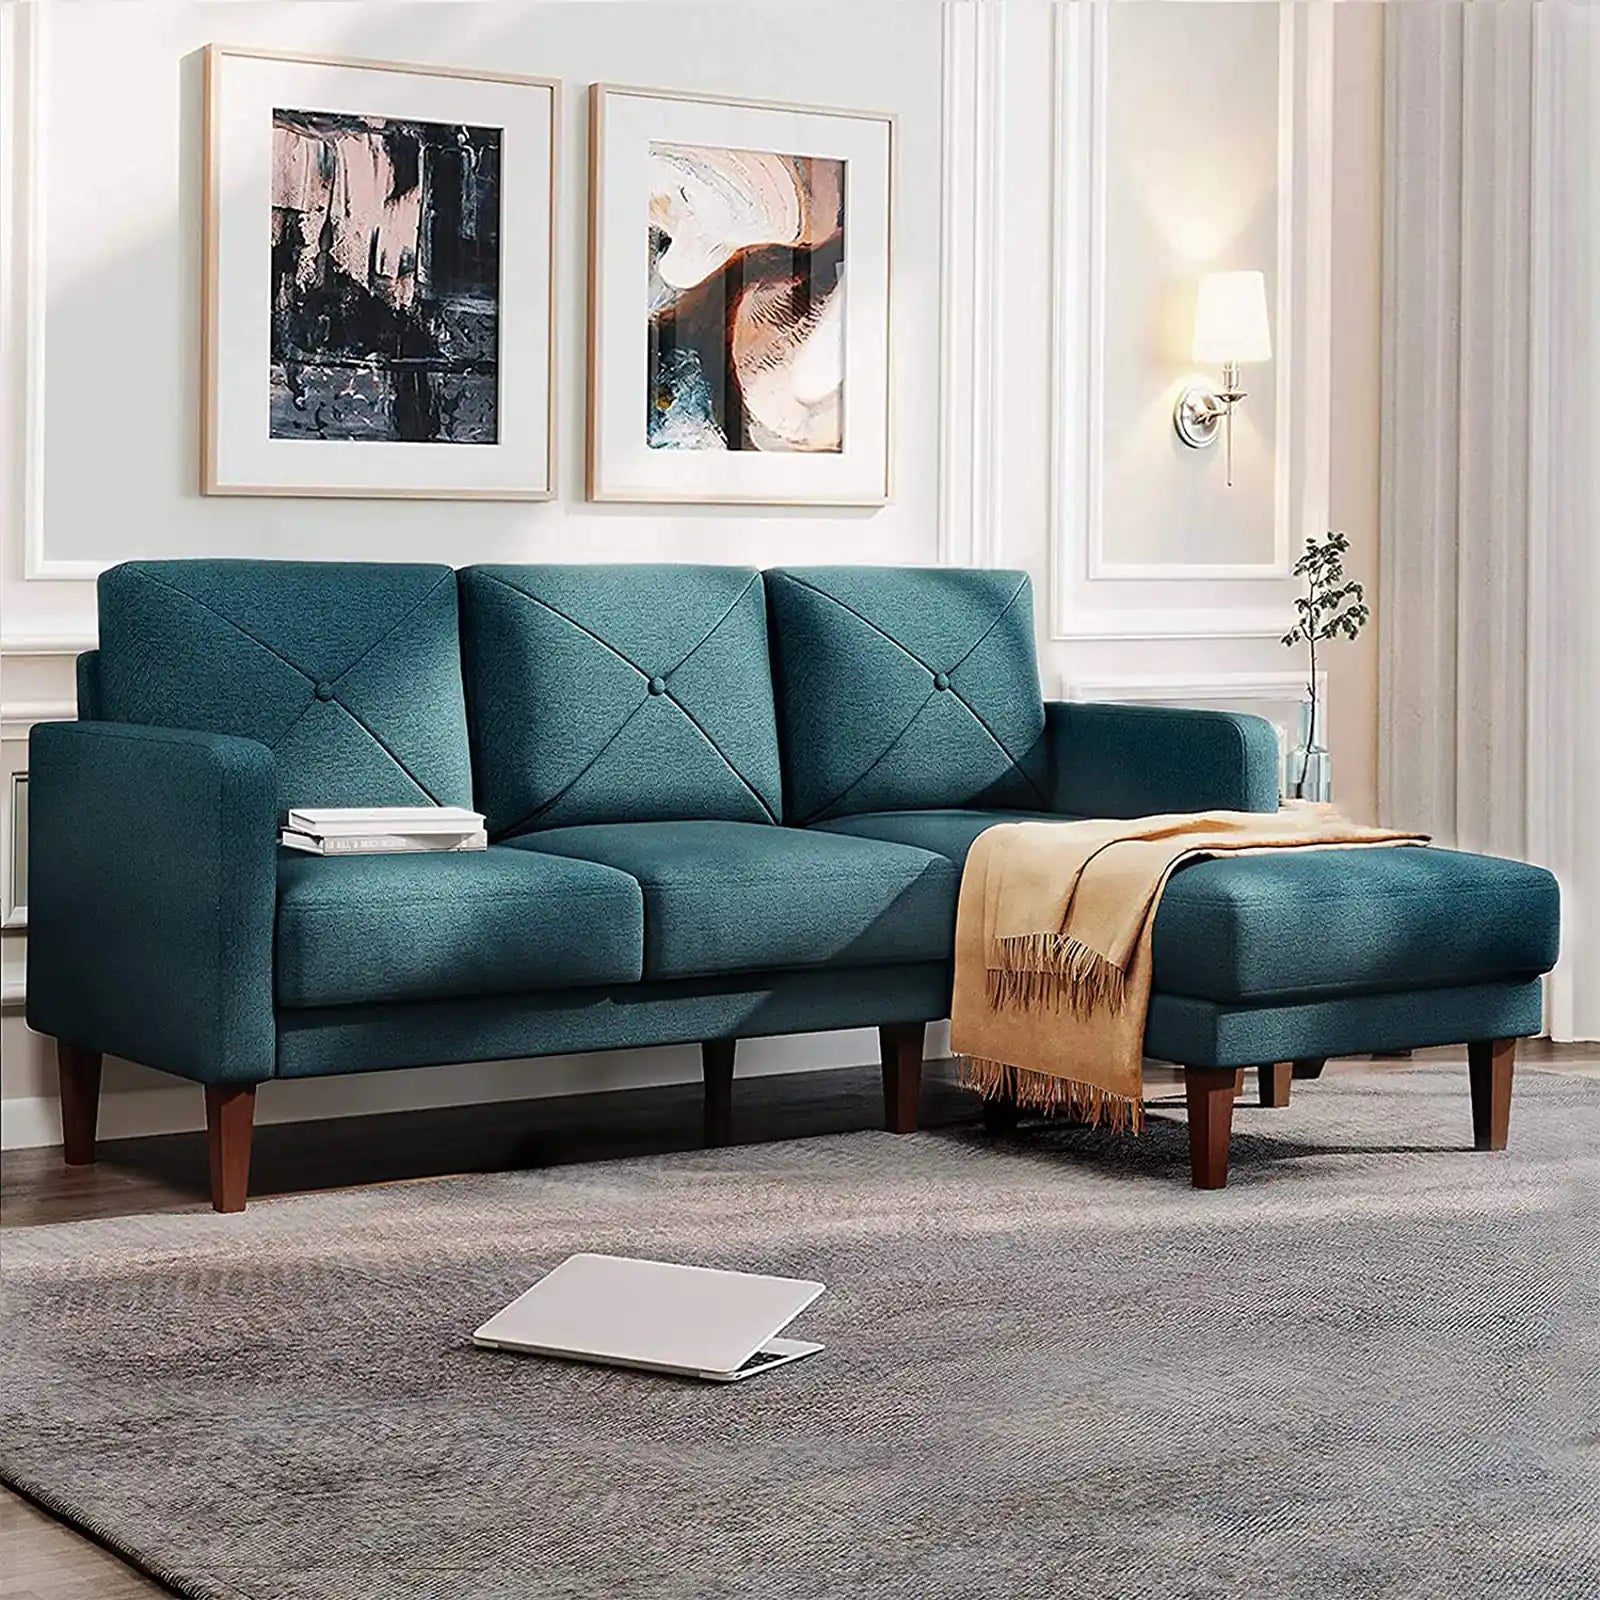 Convertible and Reversible Sectional Sofa Couch with Chaise